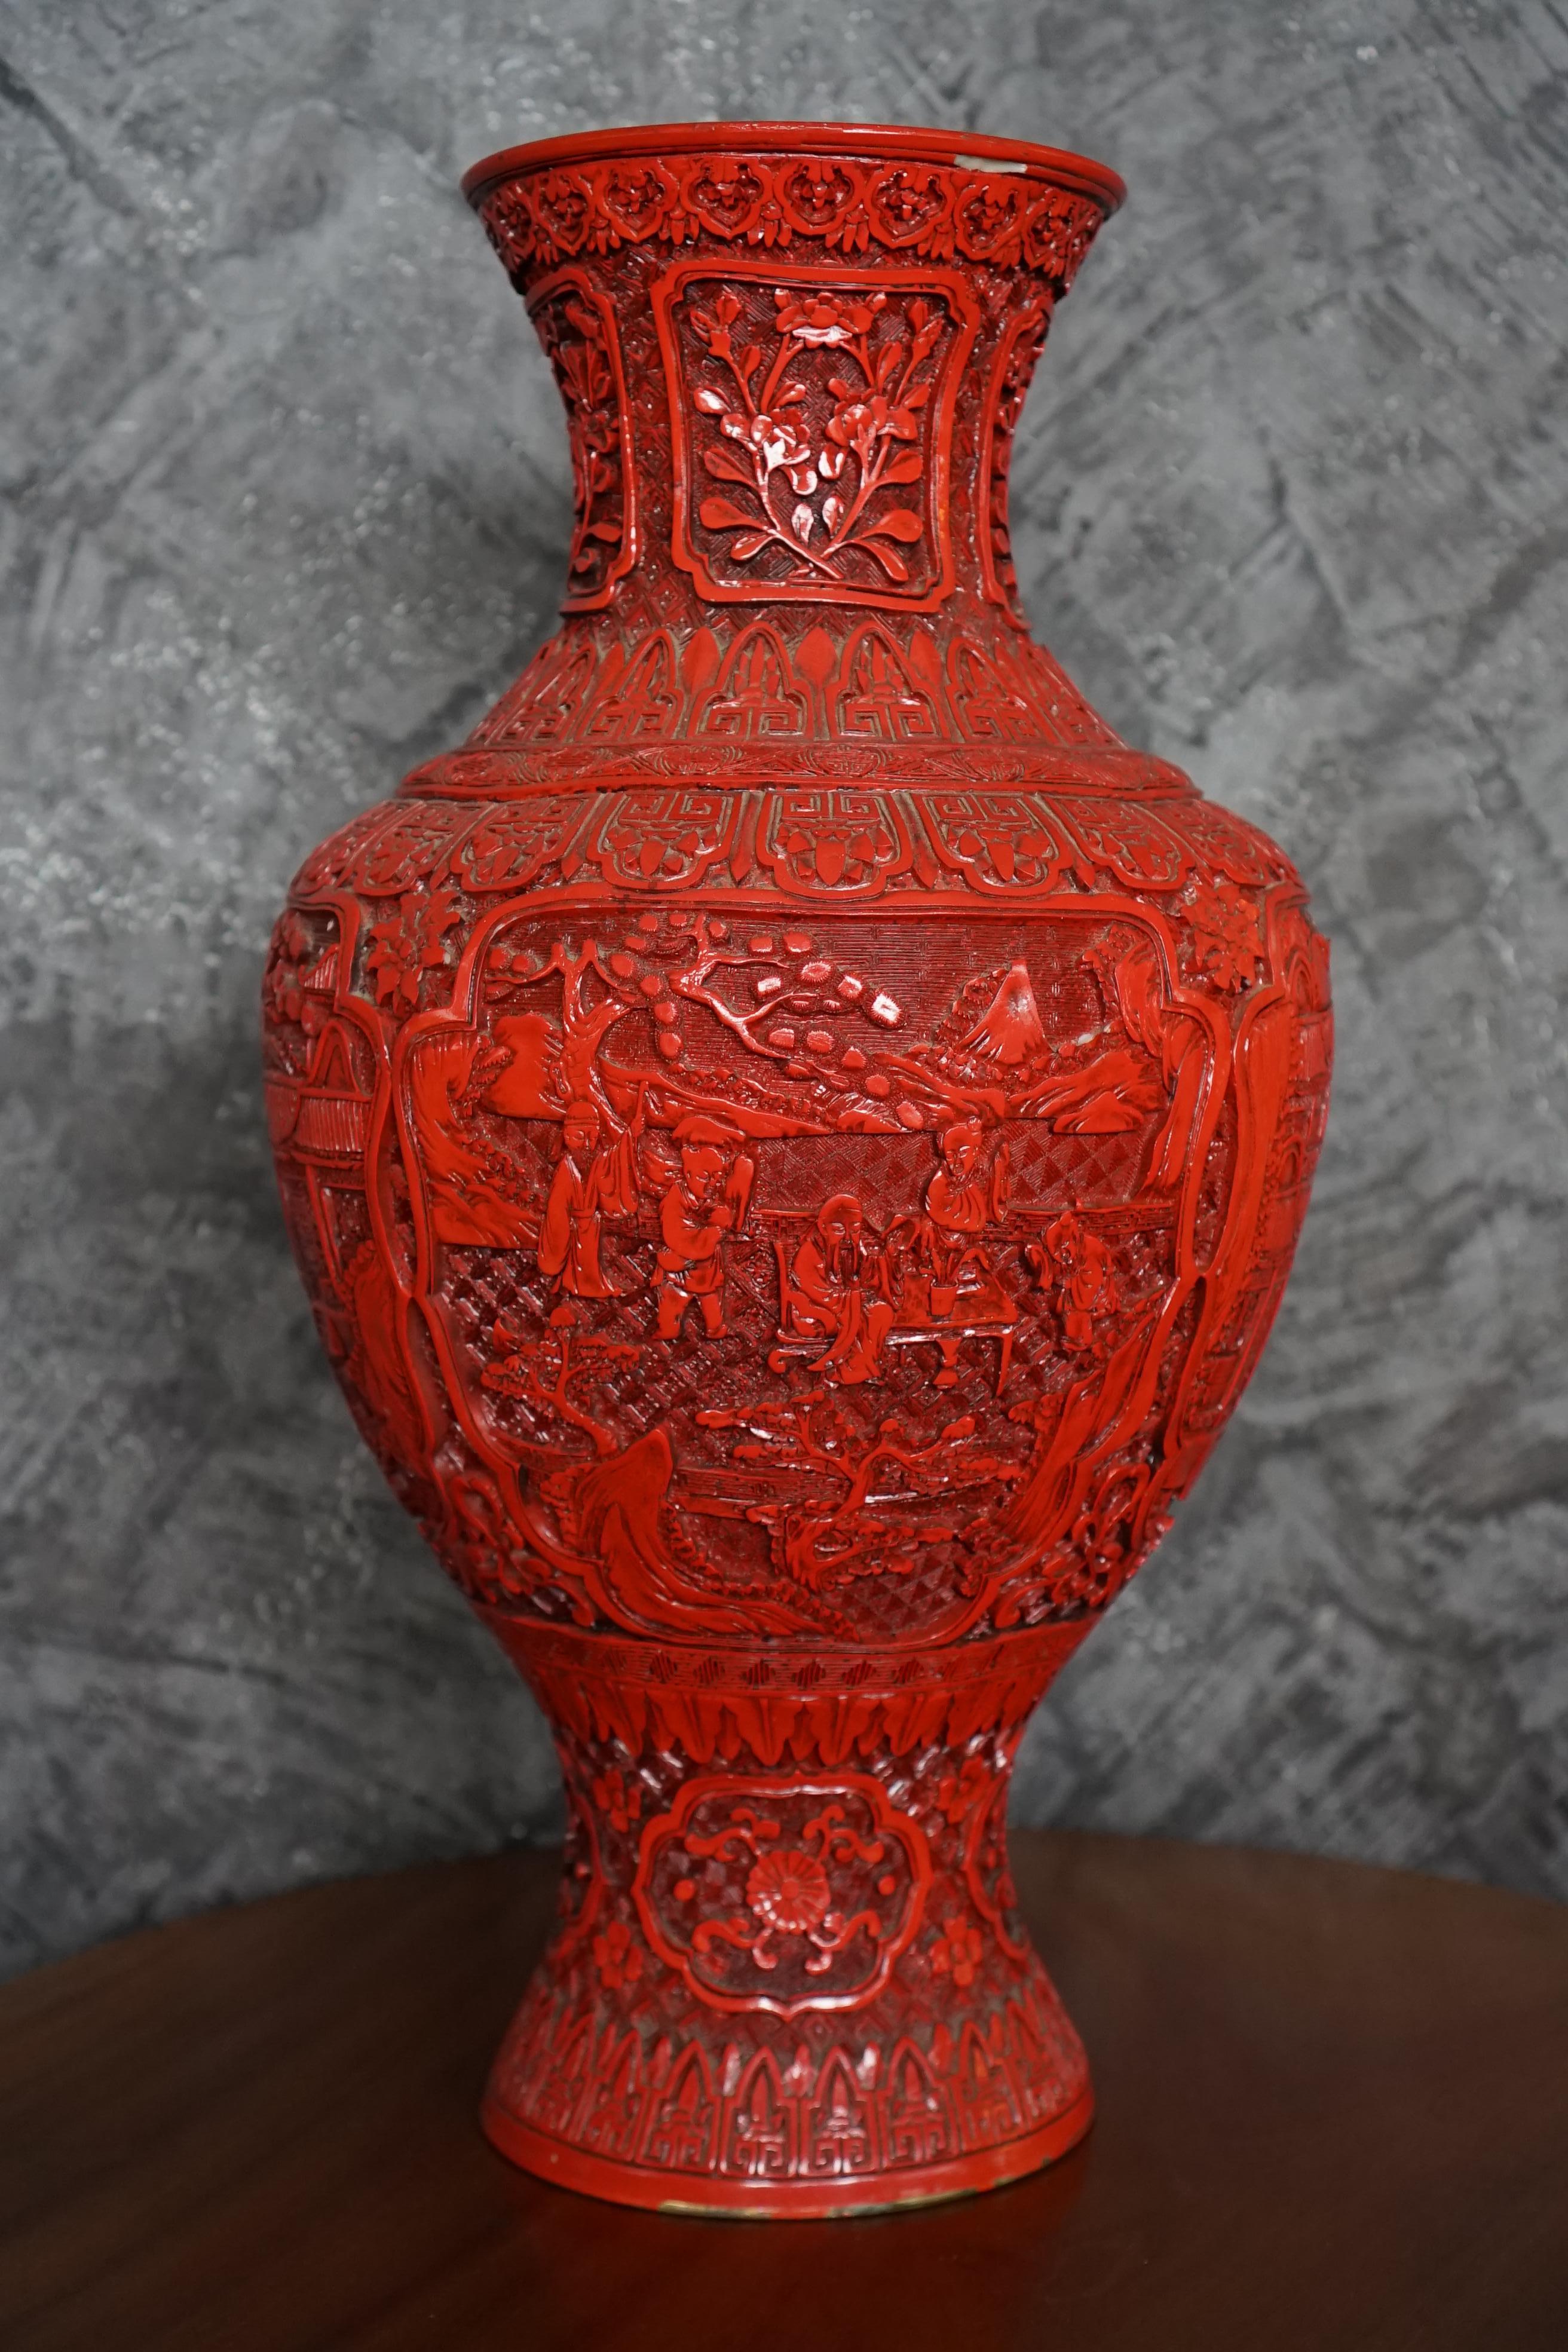 This pair of large Chinese cinnabar lacquered vases is a magnificent example of traditional Chinese craftsmanship. Standing at an impressive height, these vases feature a striking contrast between white and red lacquer, creating a visually stunning